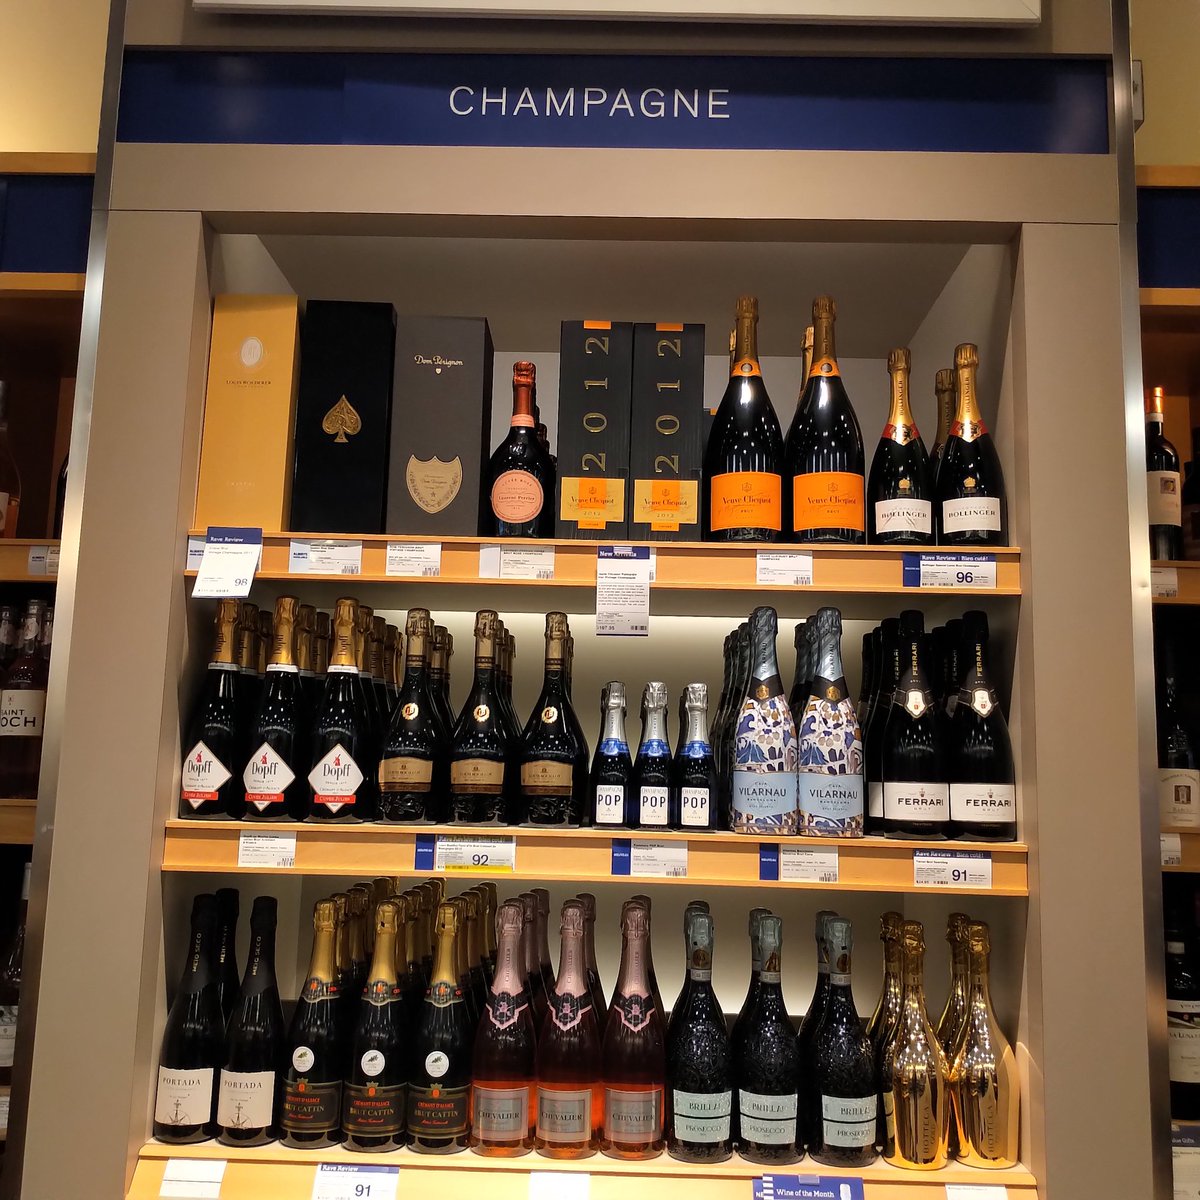 The LCBO in Ottawa has aligned itself with Putin but in reverse. Apparently various crémants, prosecco, and other sparkling wines are champagne. @WineTrackMind @robertjoseph @MeiningersWBI